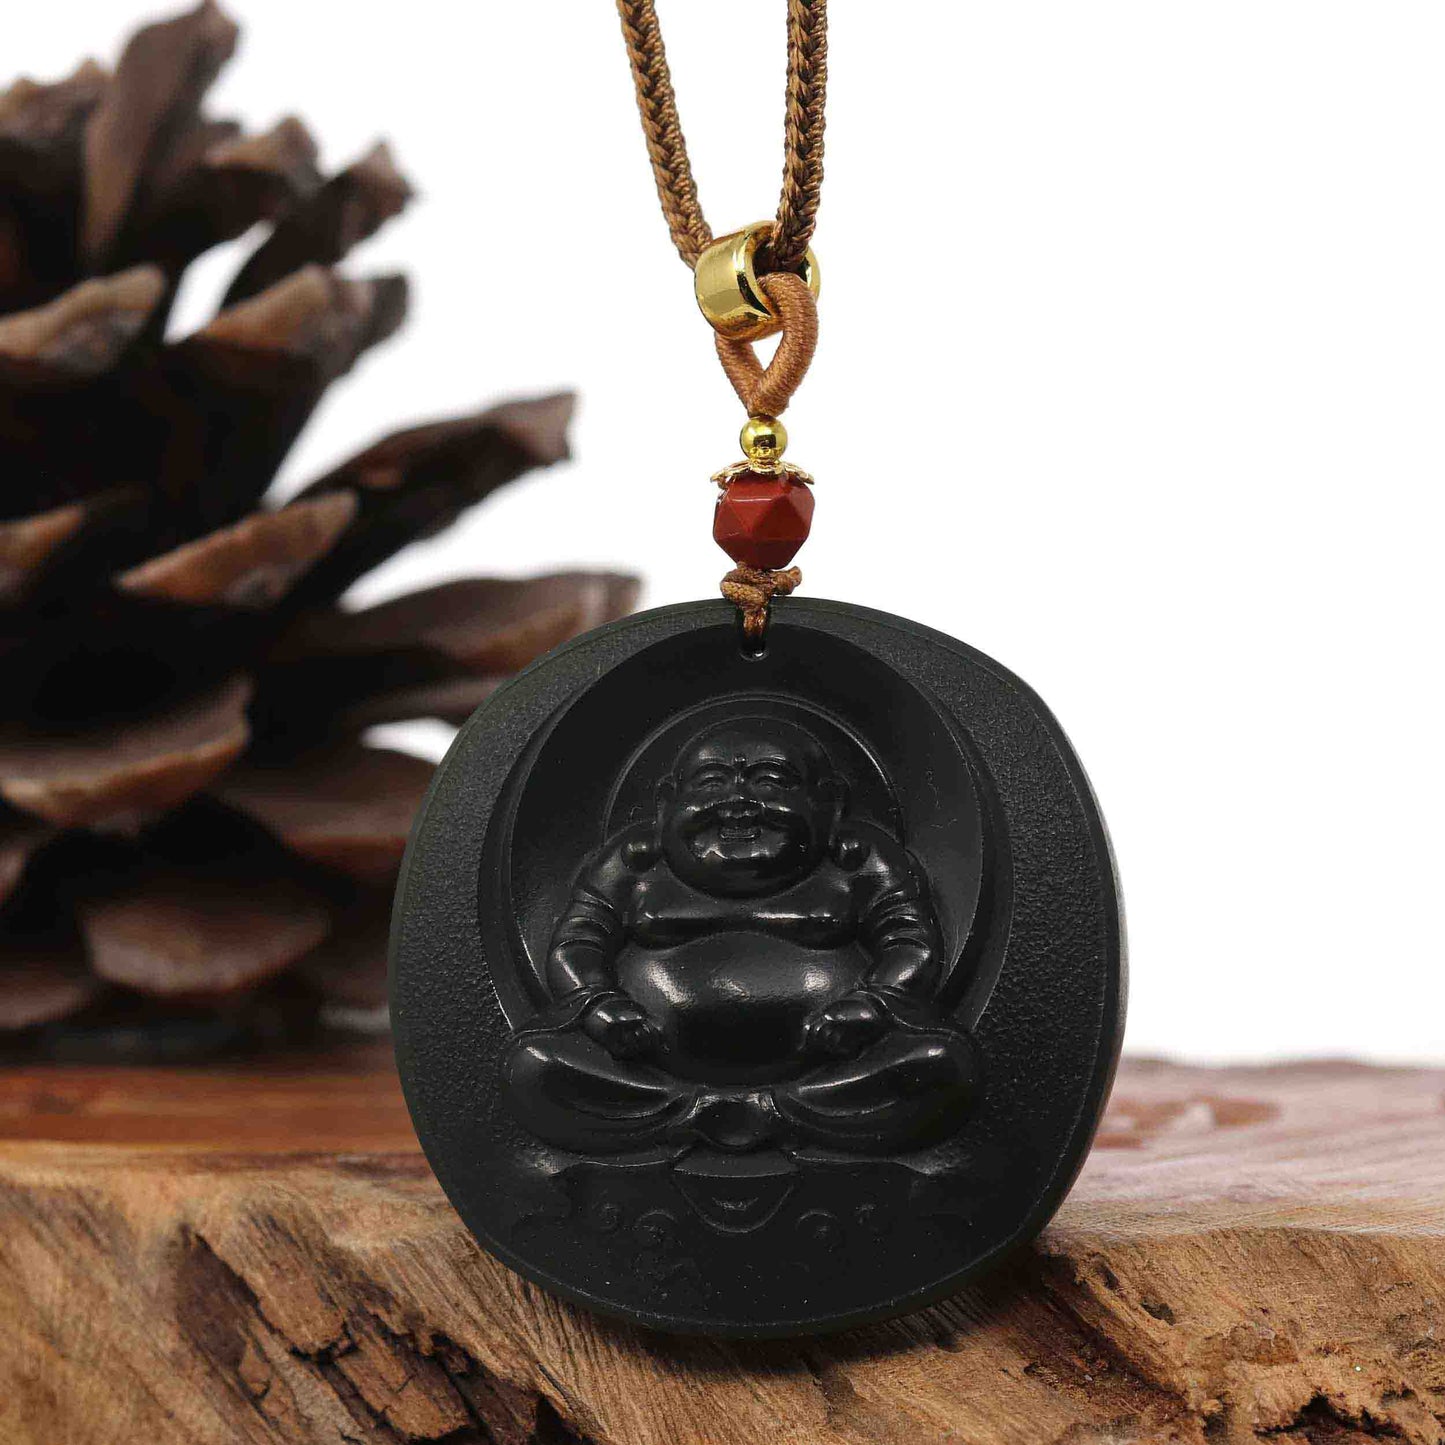 Smiling Laughing Buddha Black Jade Pendant Necklace Rope Chain Genuine  Certified Grade A Jadeite Jade Hand Crafted, Jade Rope Chain, Jade Necklace,  Black Jade 22